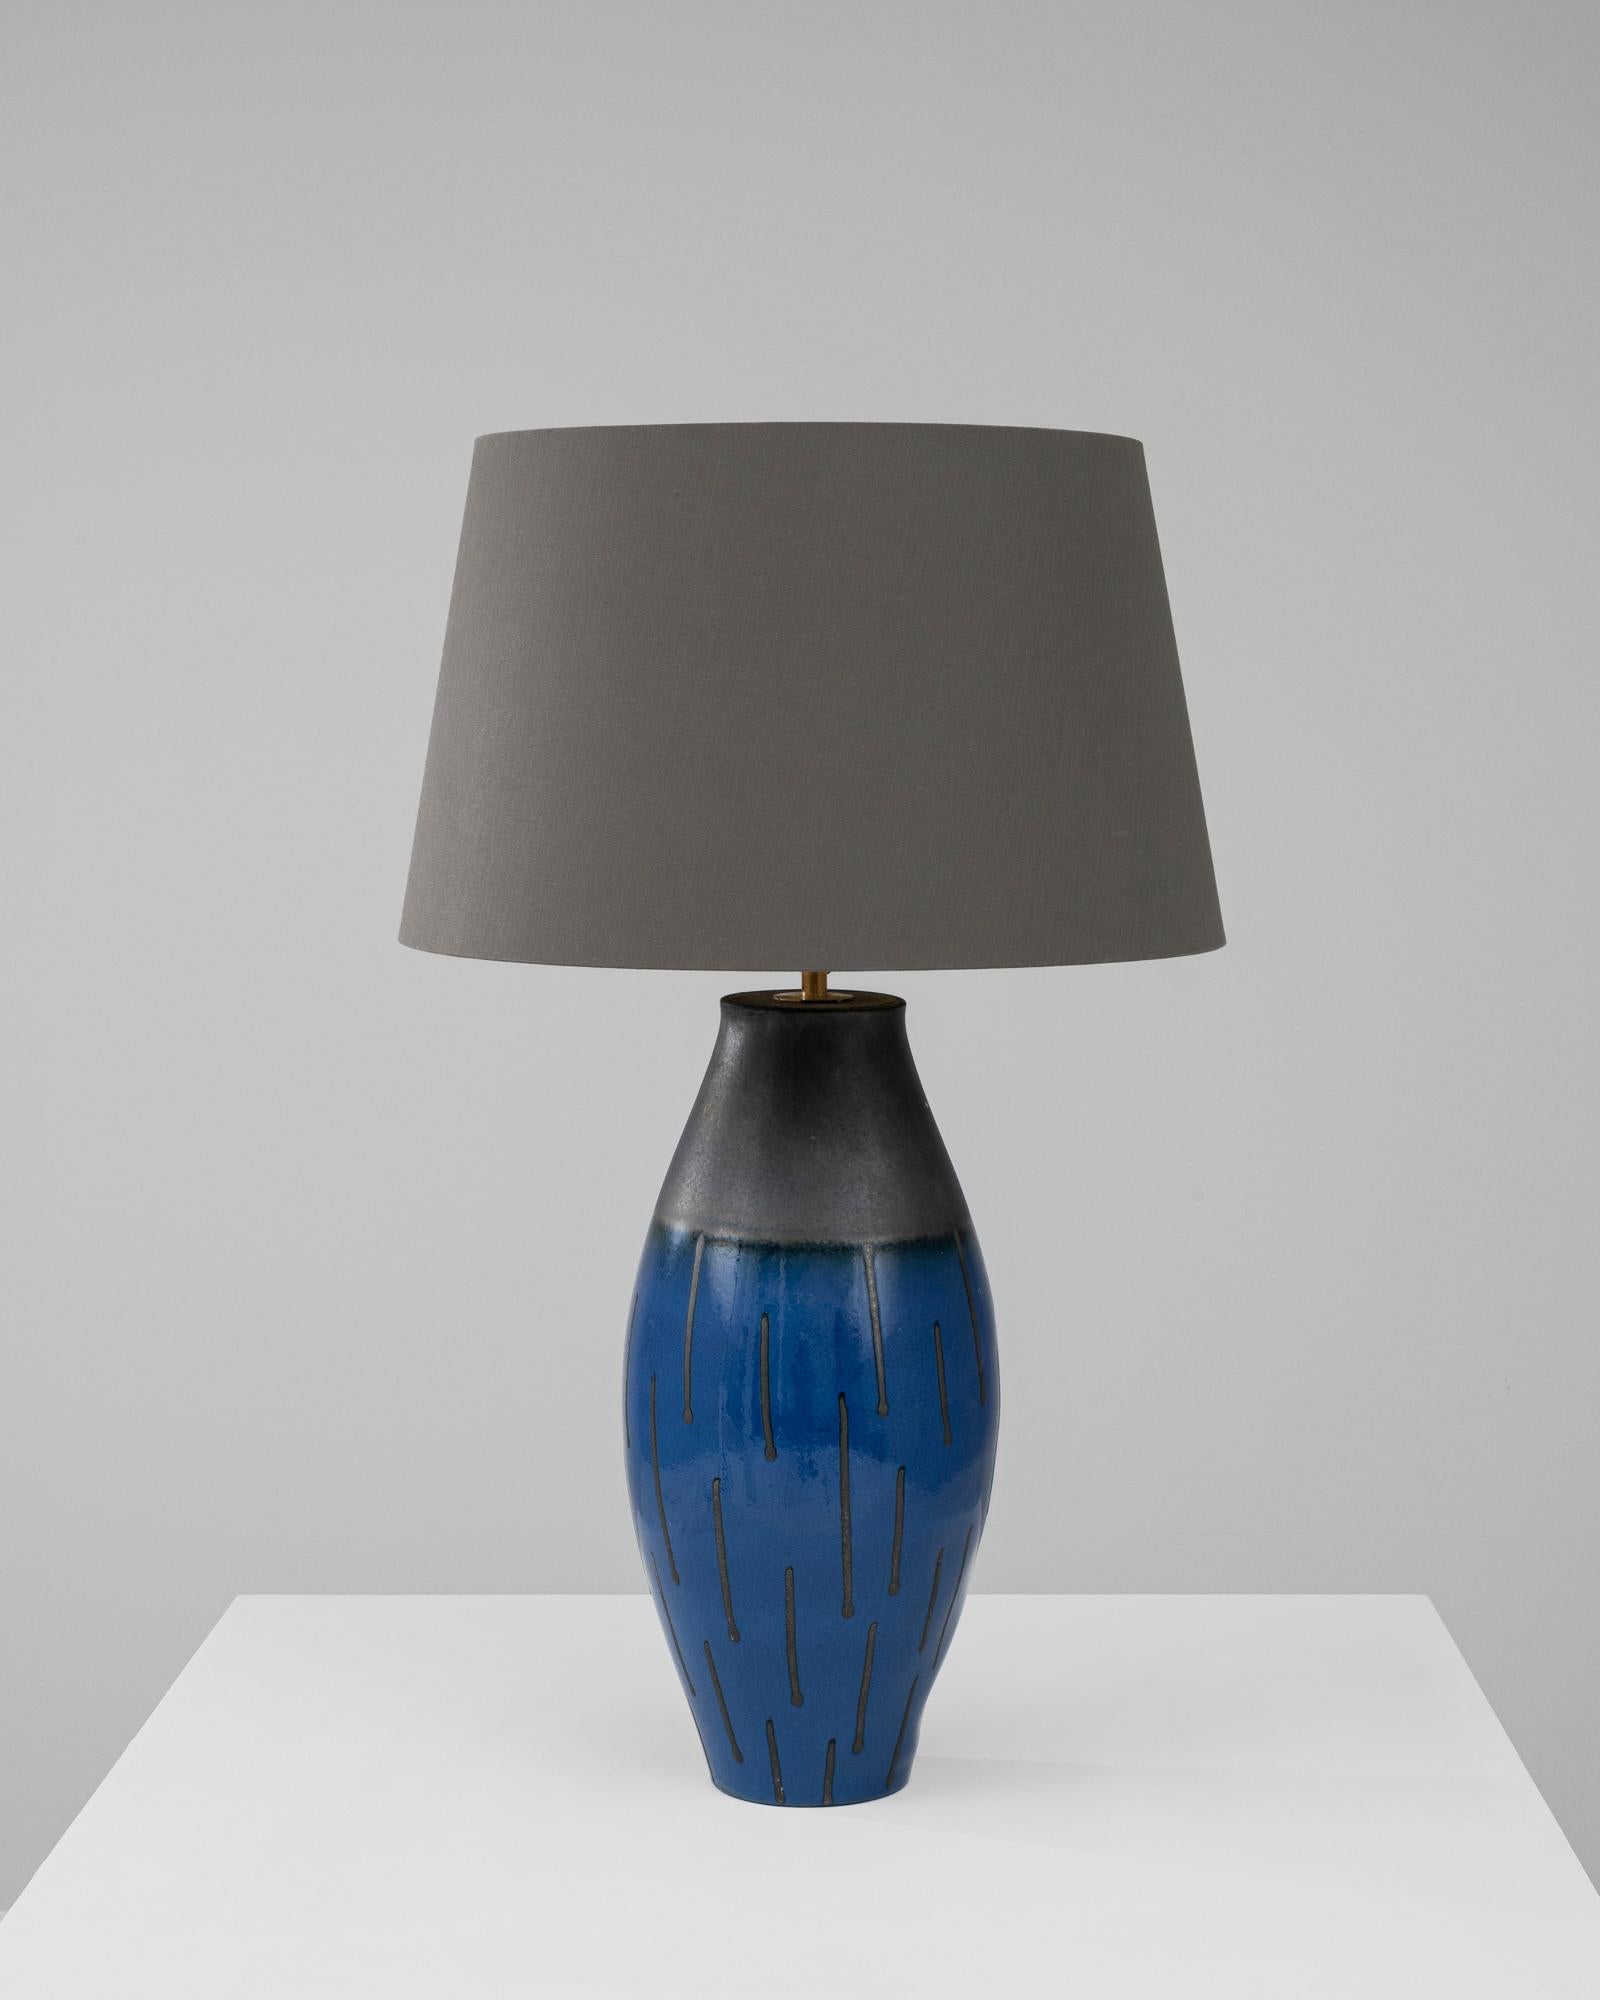 Illuminate your space with the captivating aura of the 20th Century German Ceramic Table Lamp, a masterpiece of both form and function. This striking lamp boasts a vivid, cobalt blue ceramic base with a gracefully tapered form, accented with bold,